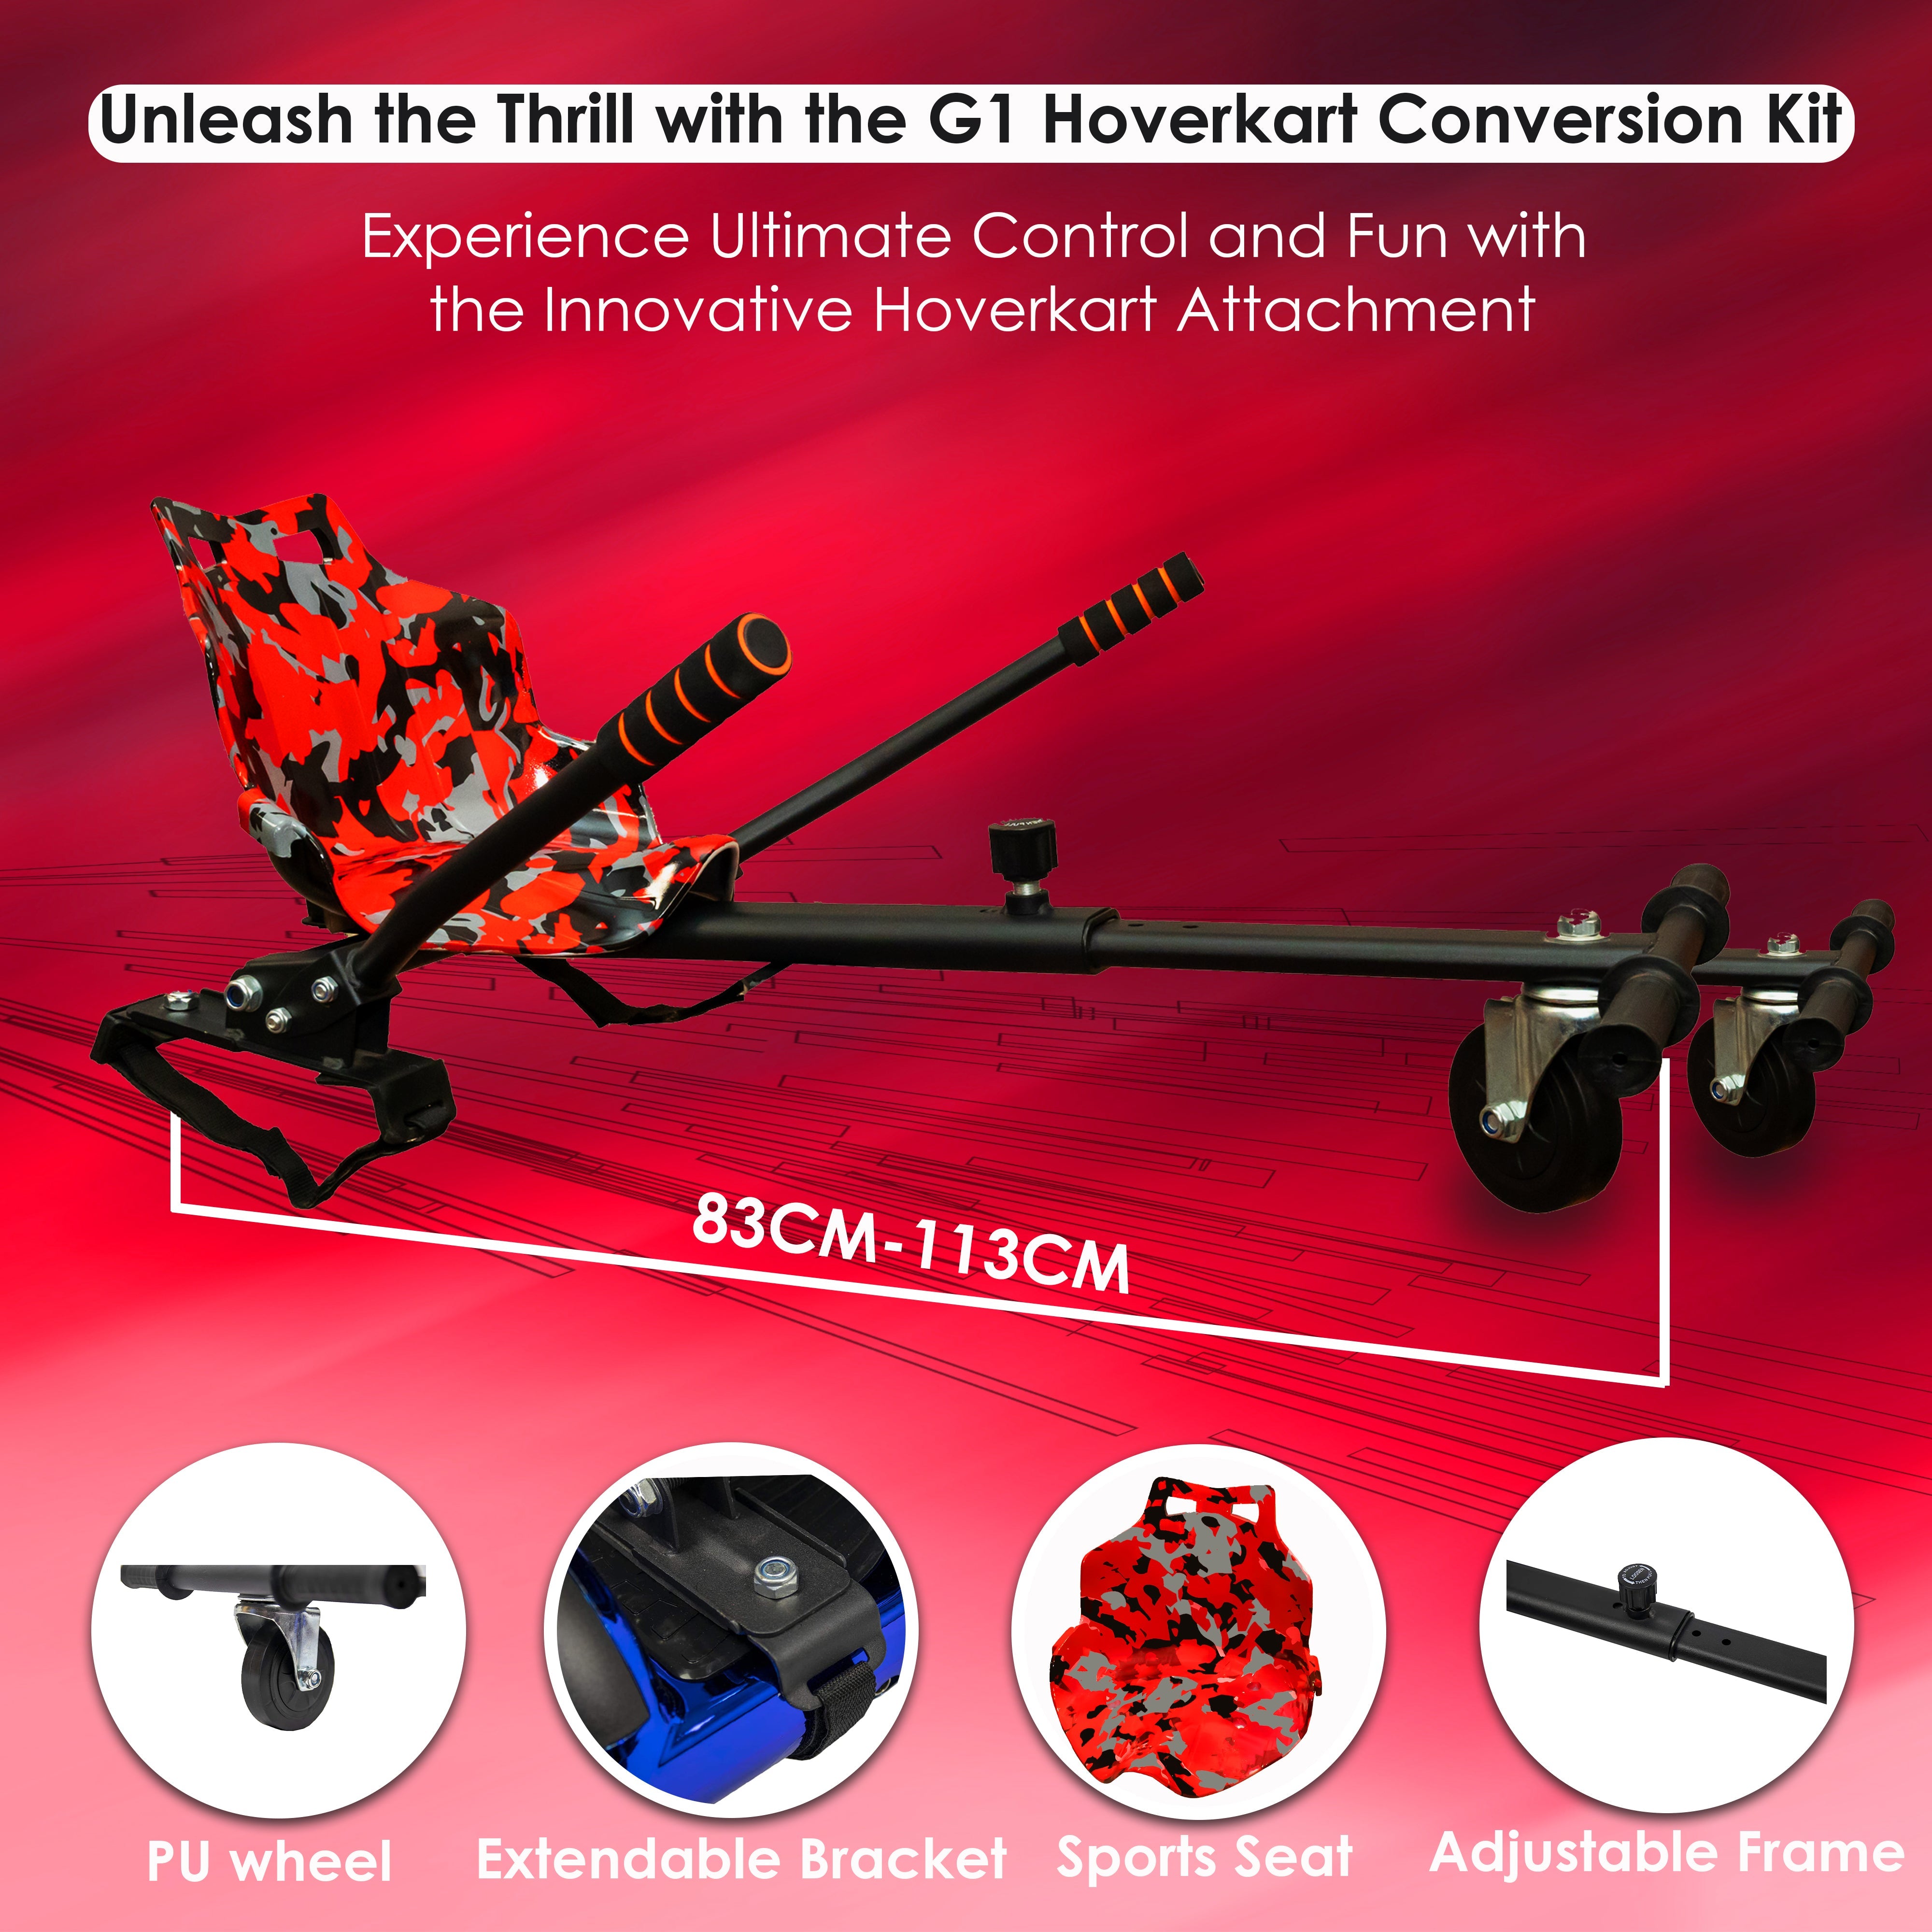 Red hoverkart conversion kit featuring a camouflage sports seat, adjustable black frame, PU wheel, and extendable bracket on a dynamic red background.